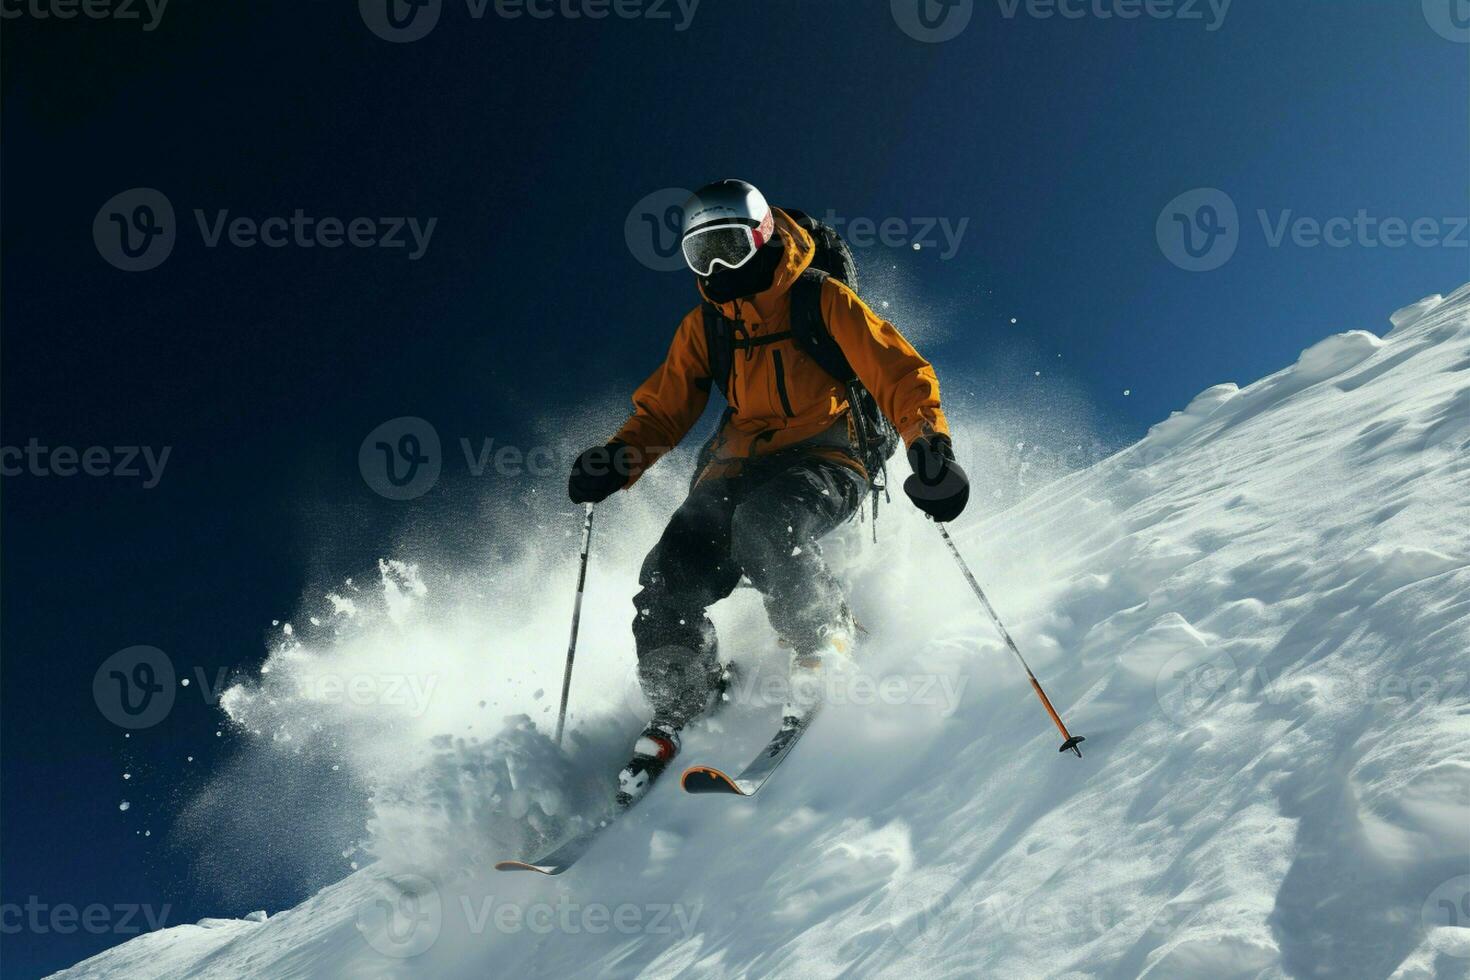 Skier carves the snowy landscape, displaying skill on the wintry slopes AI Generated photo